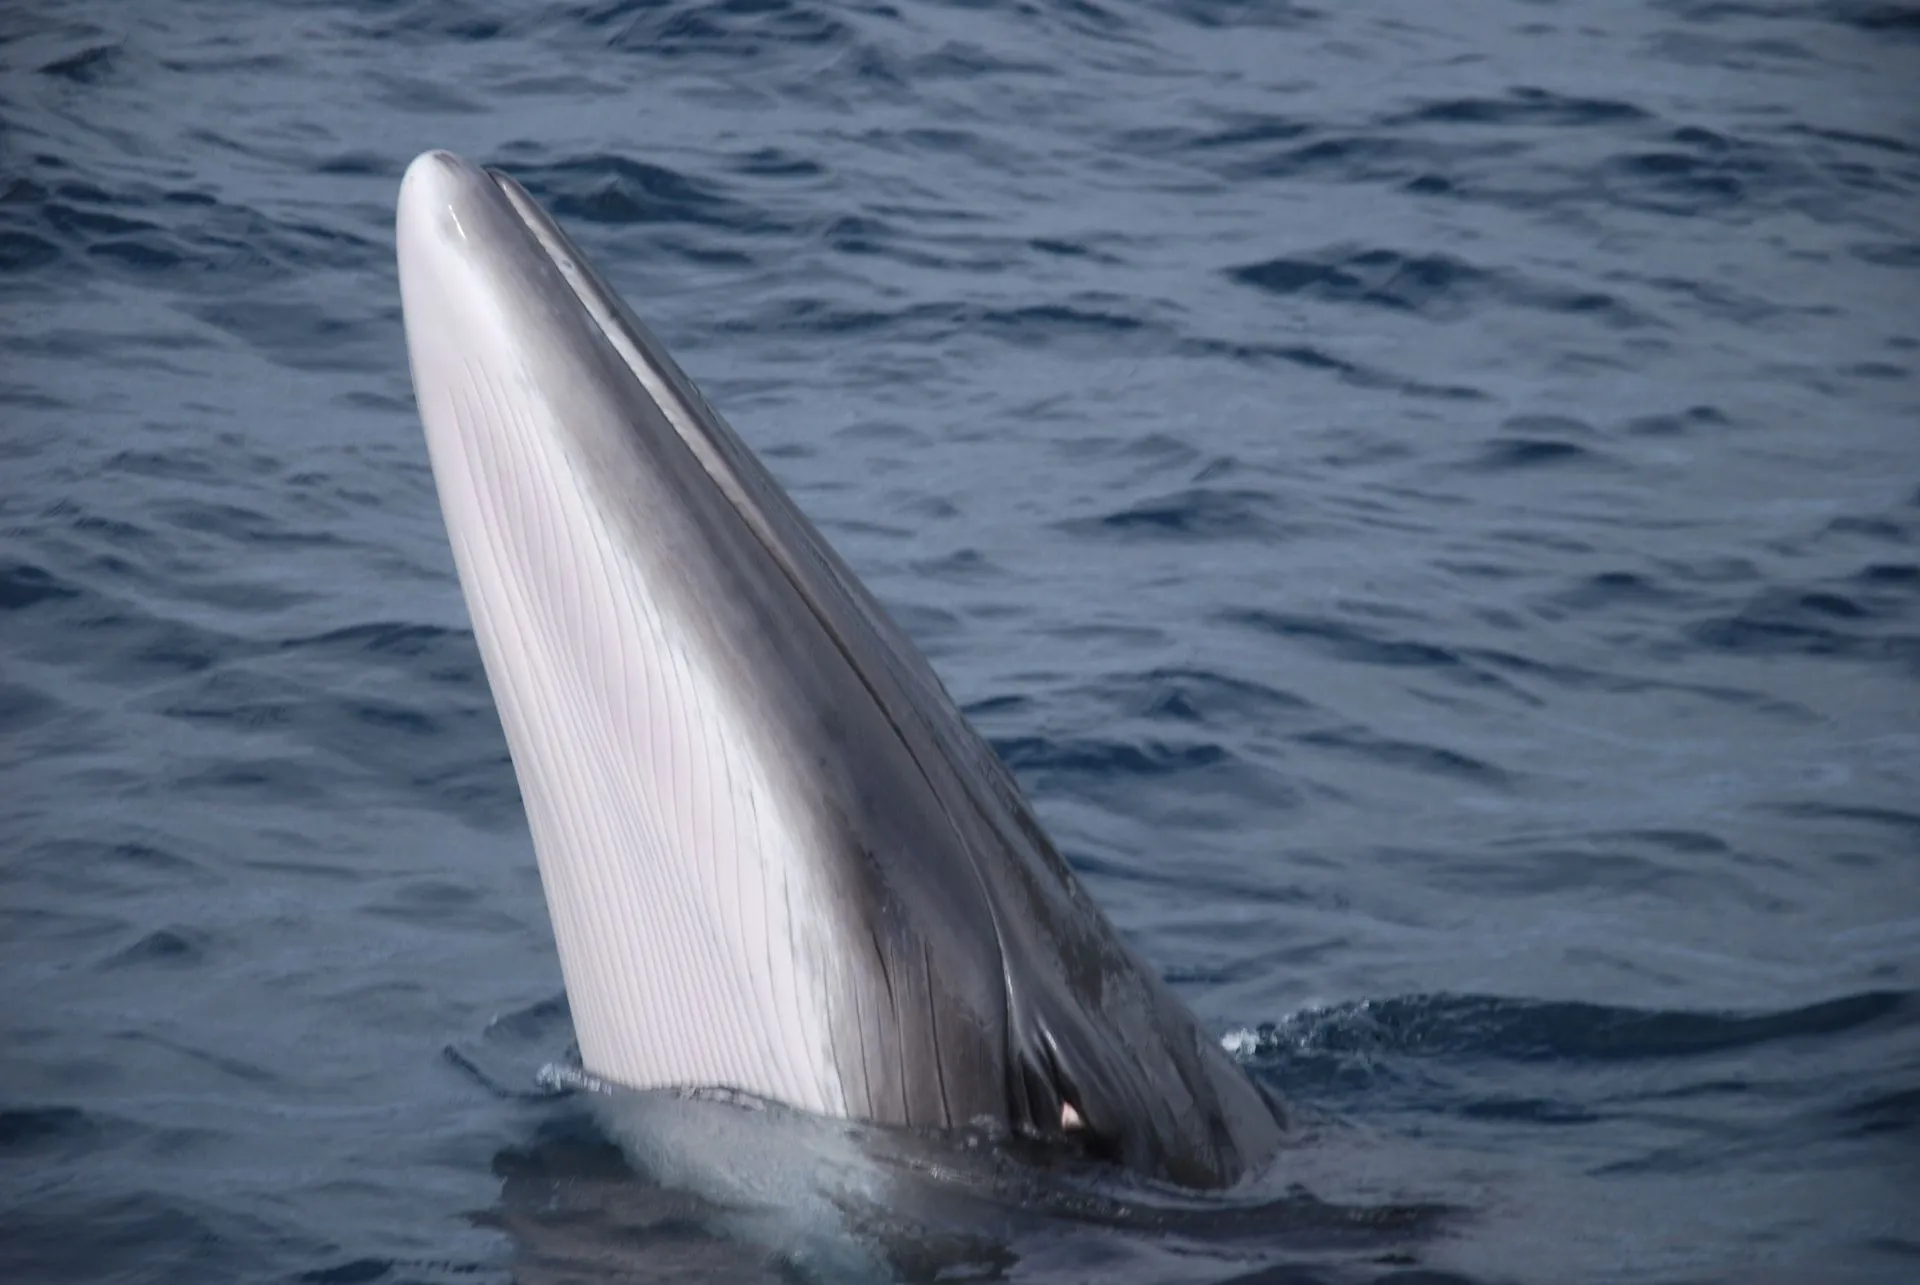 These fish species are also known as a baleen whale.